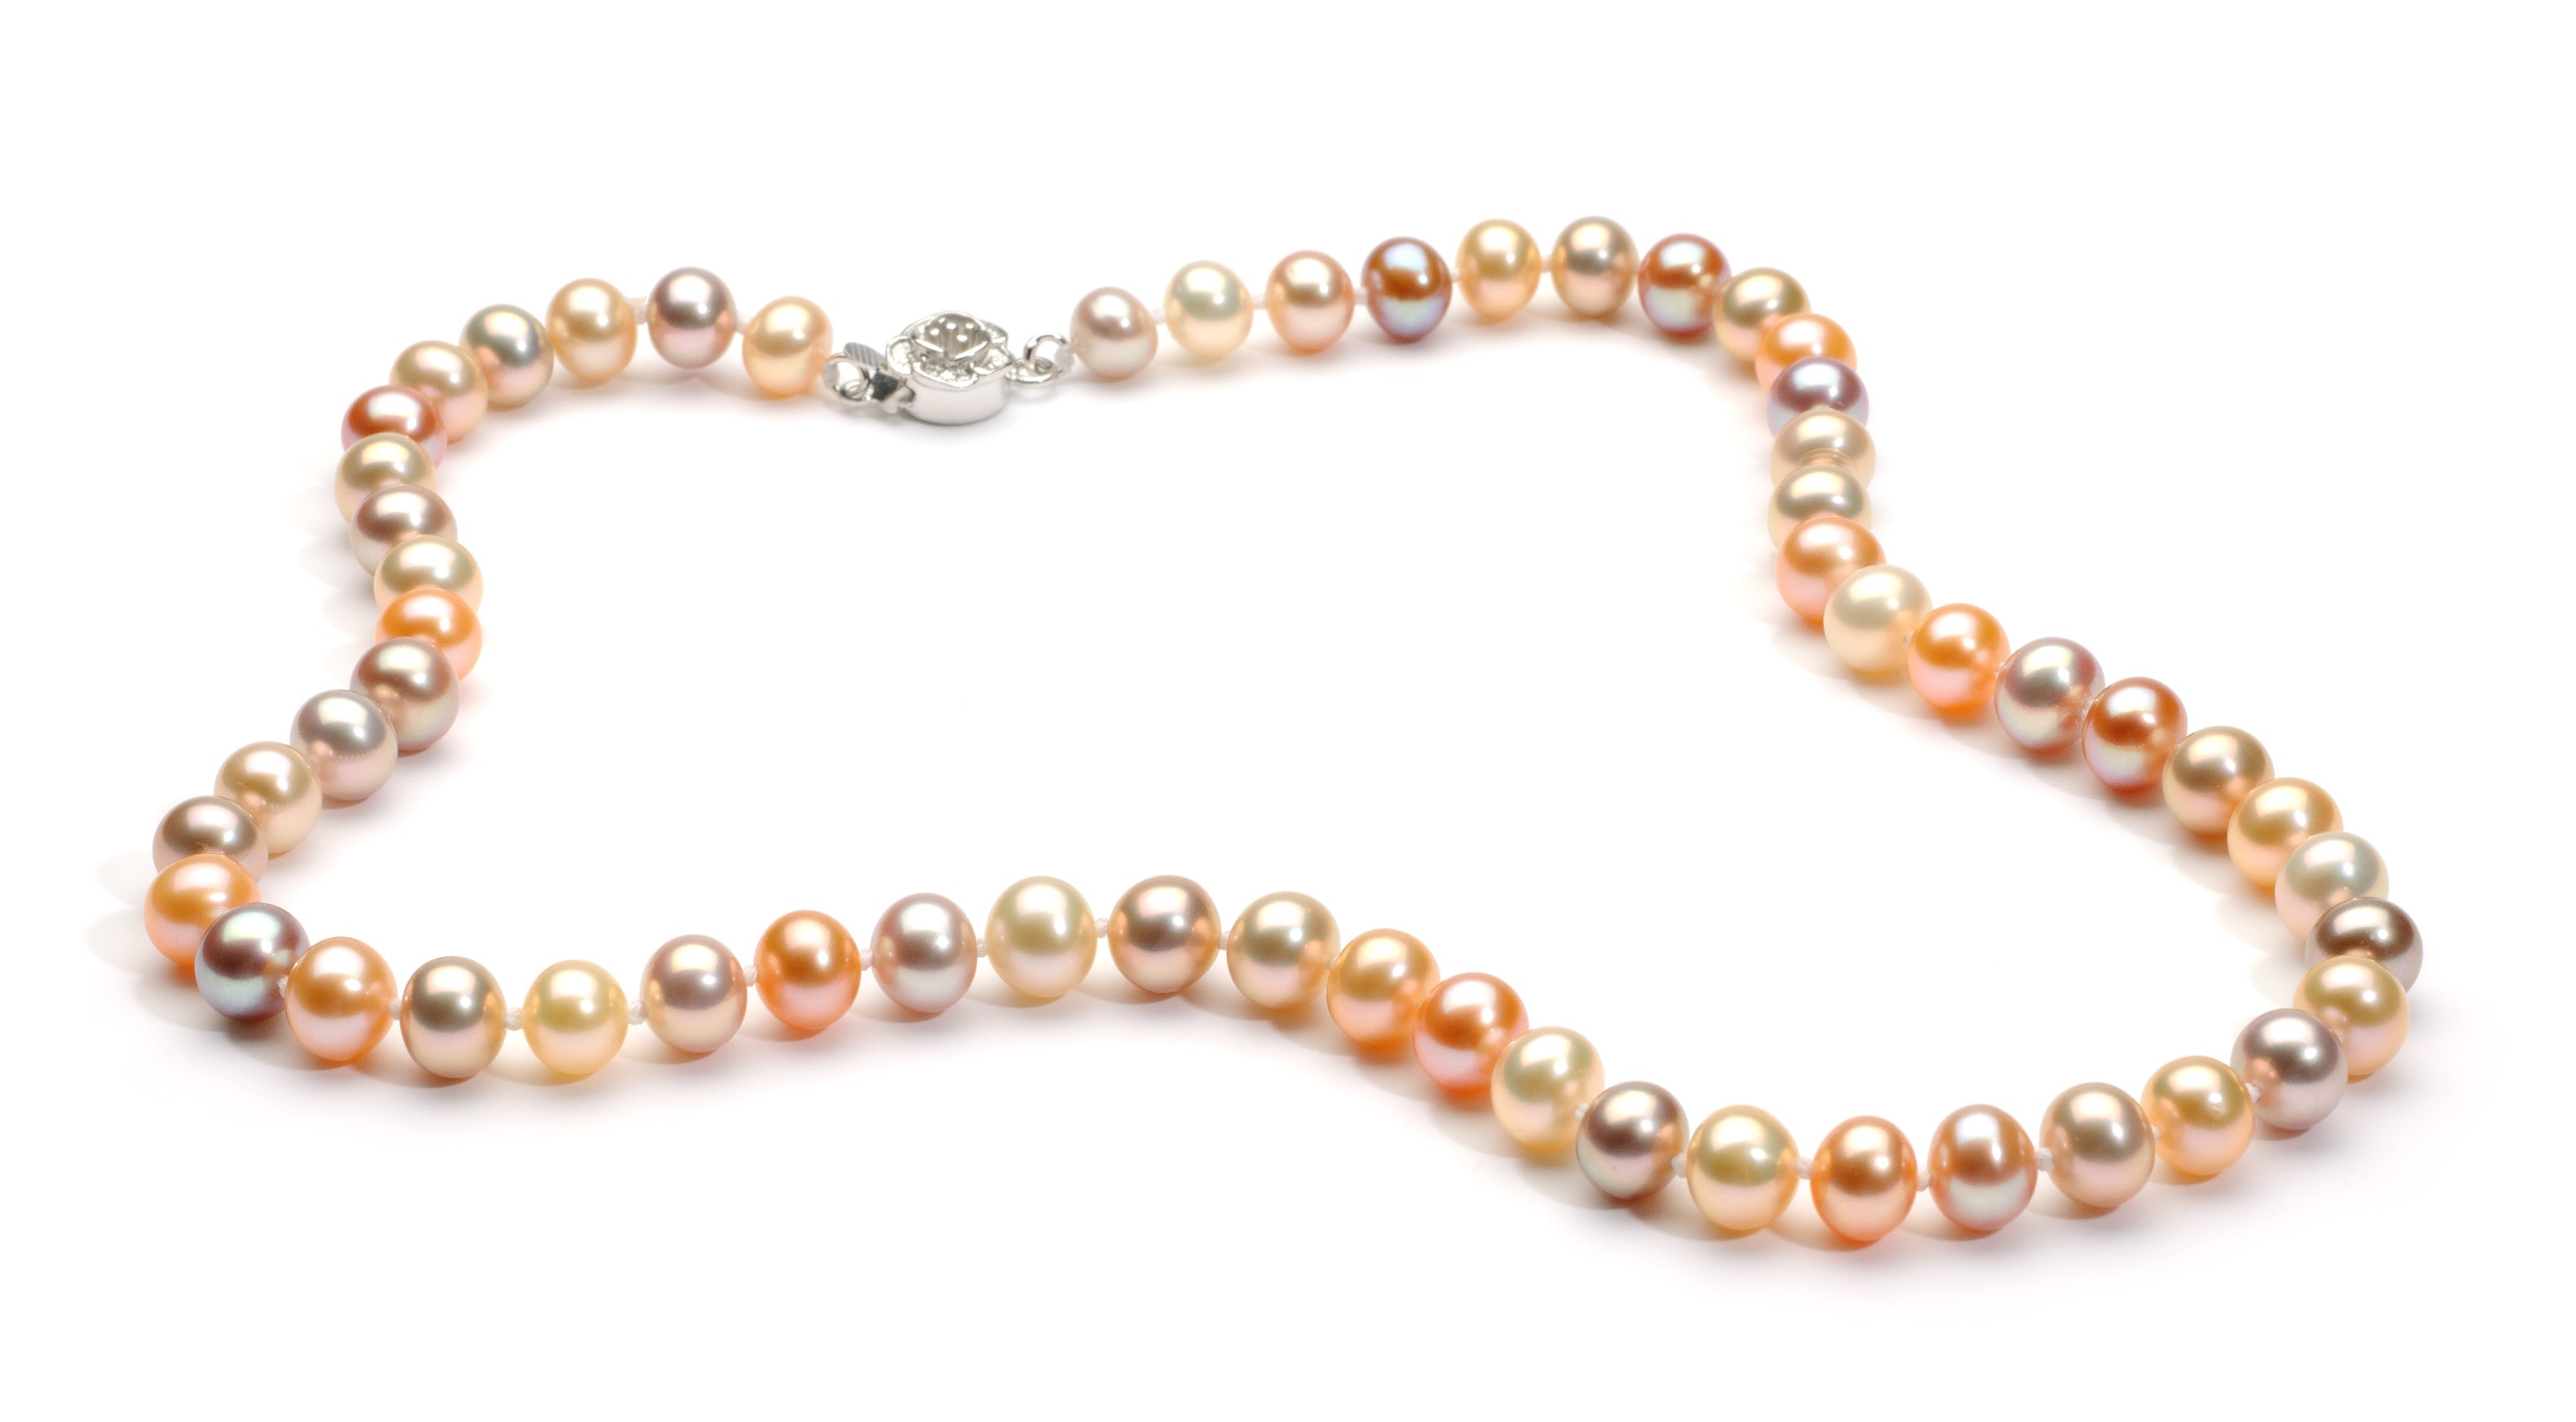 6.0-7.0 mm Multi-color Freshwater Pearl Necklace